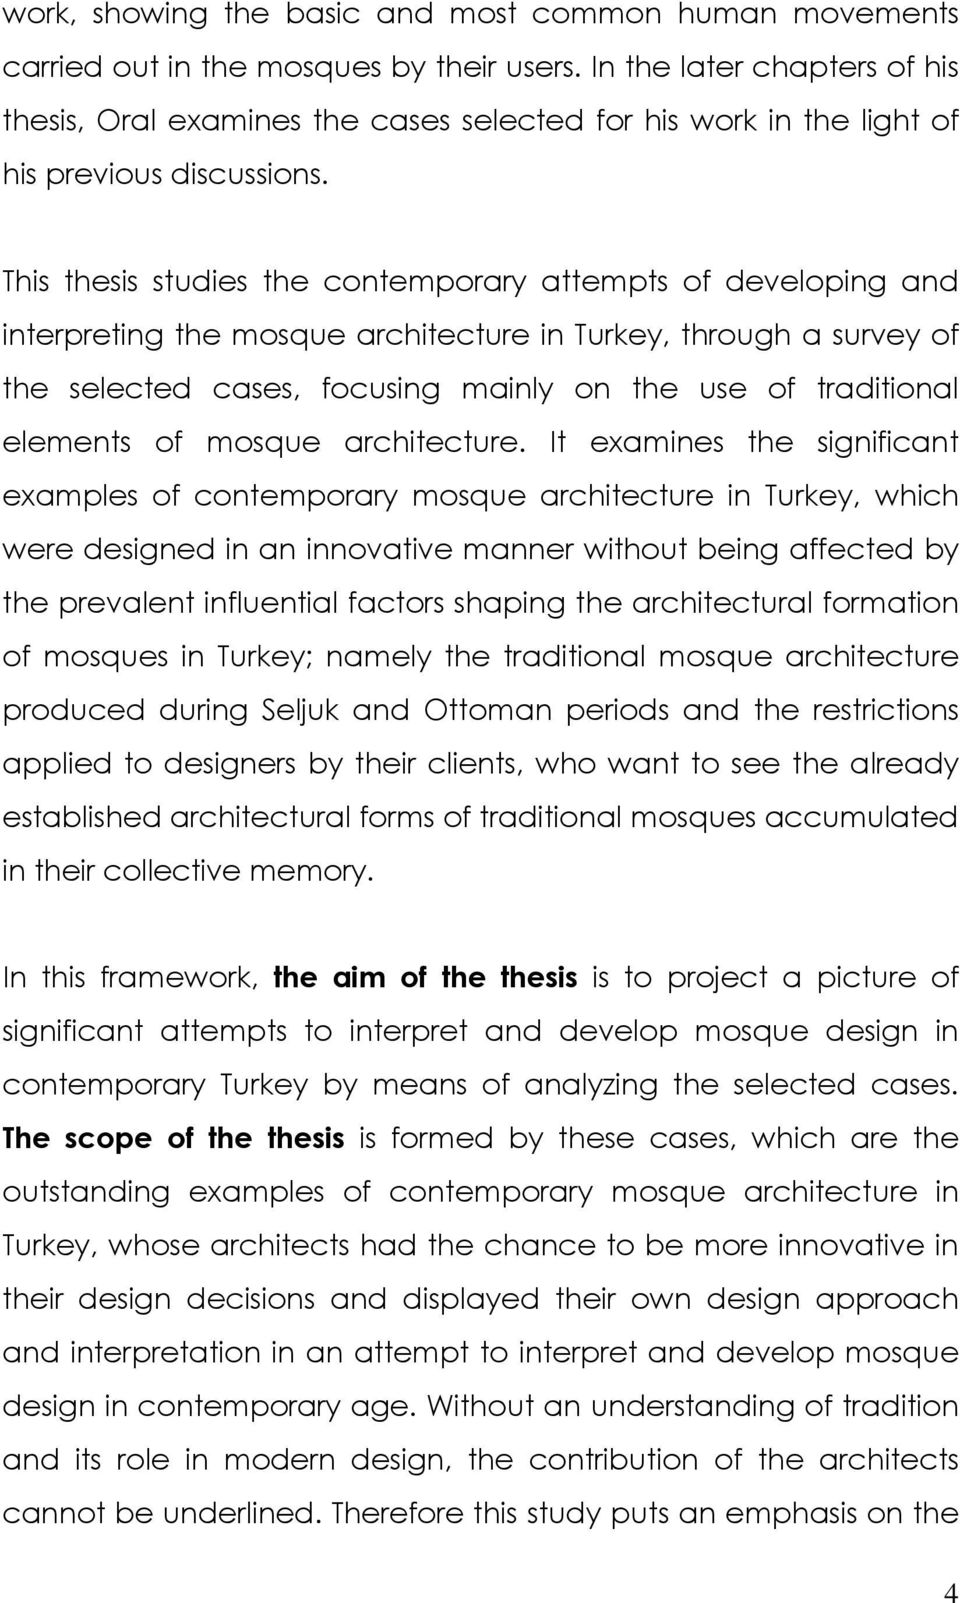 This thesis studies the contemporary attempts of developing and interpreting the mosque architecture in Turkey, through a survey of the selected cases, focusing mainly on the use of traditional